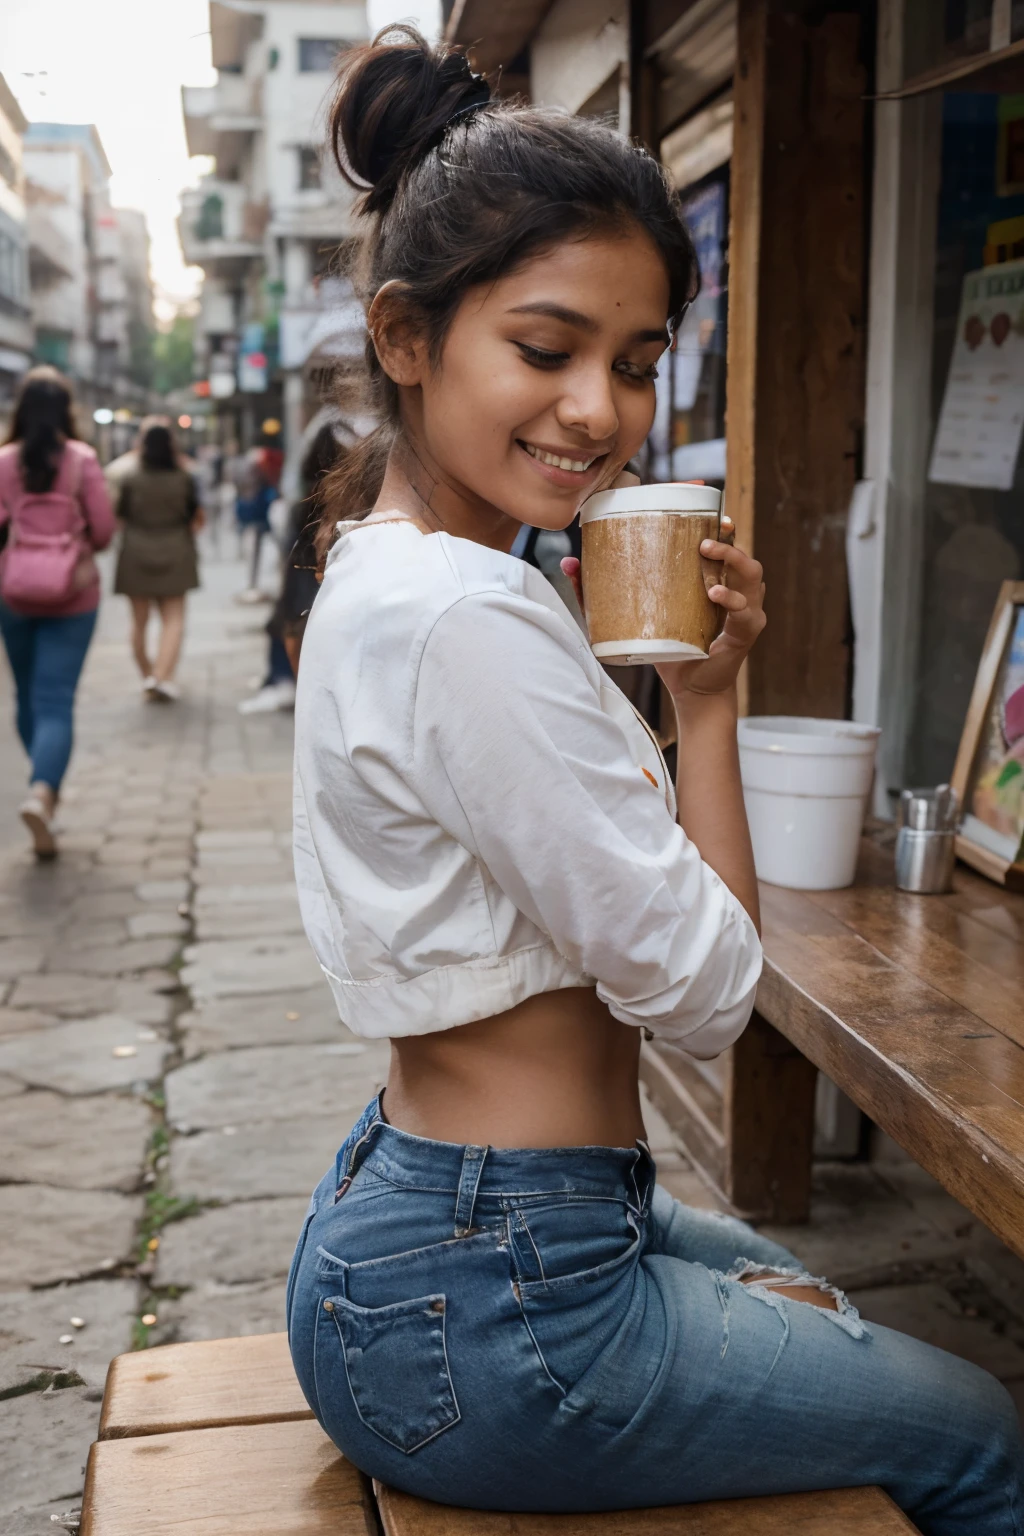 lifelike， high - resolution：1.3）， 1 Indian girl with a perfect